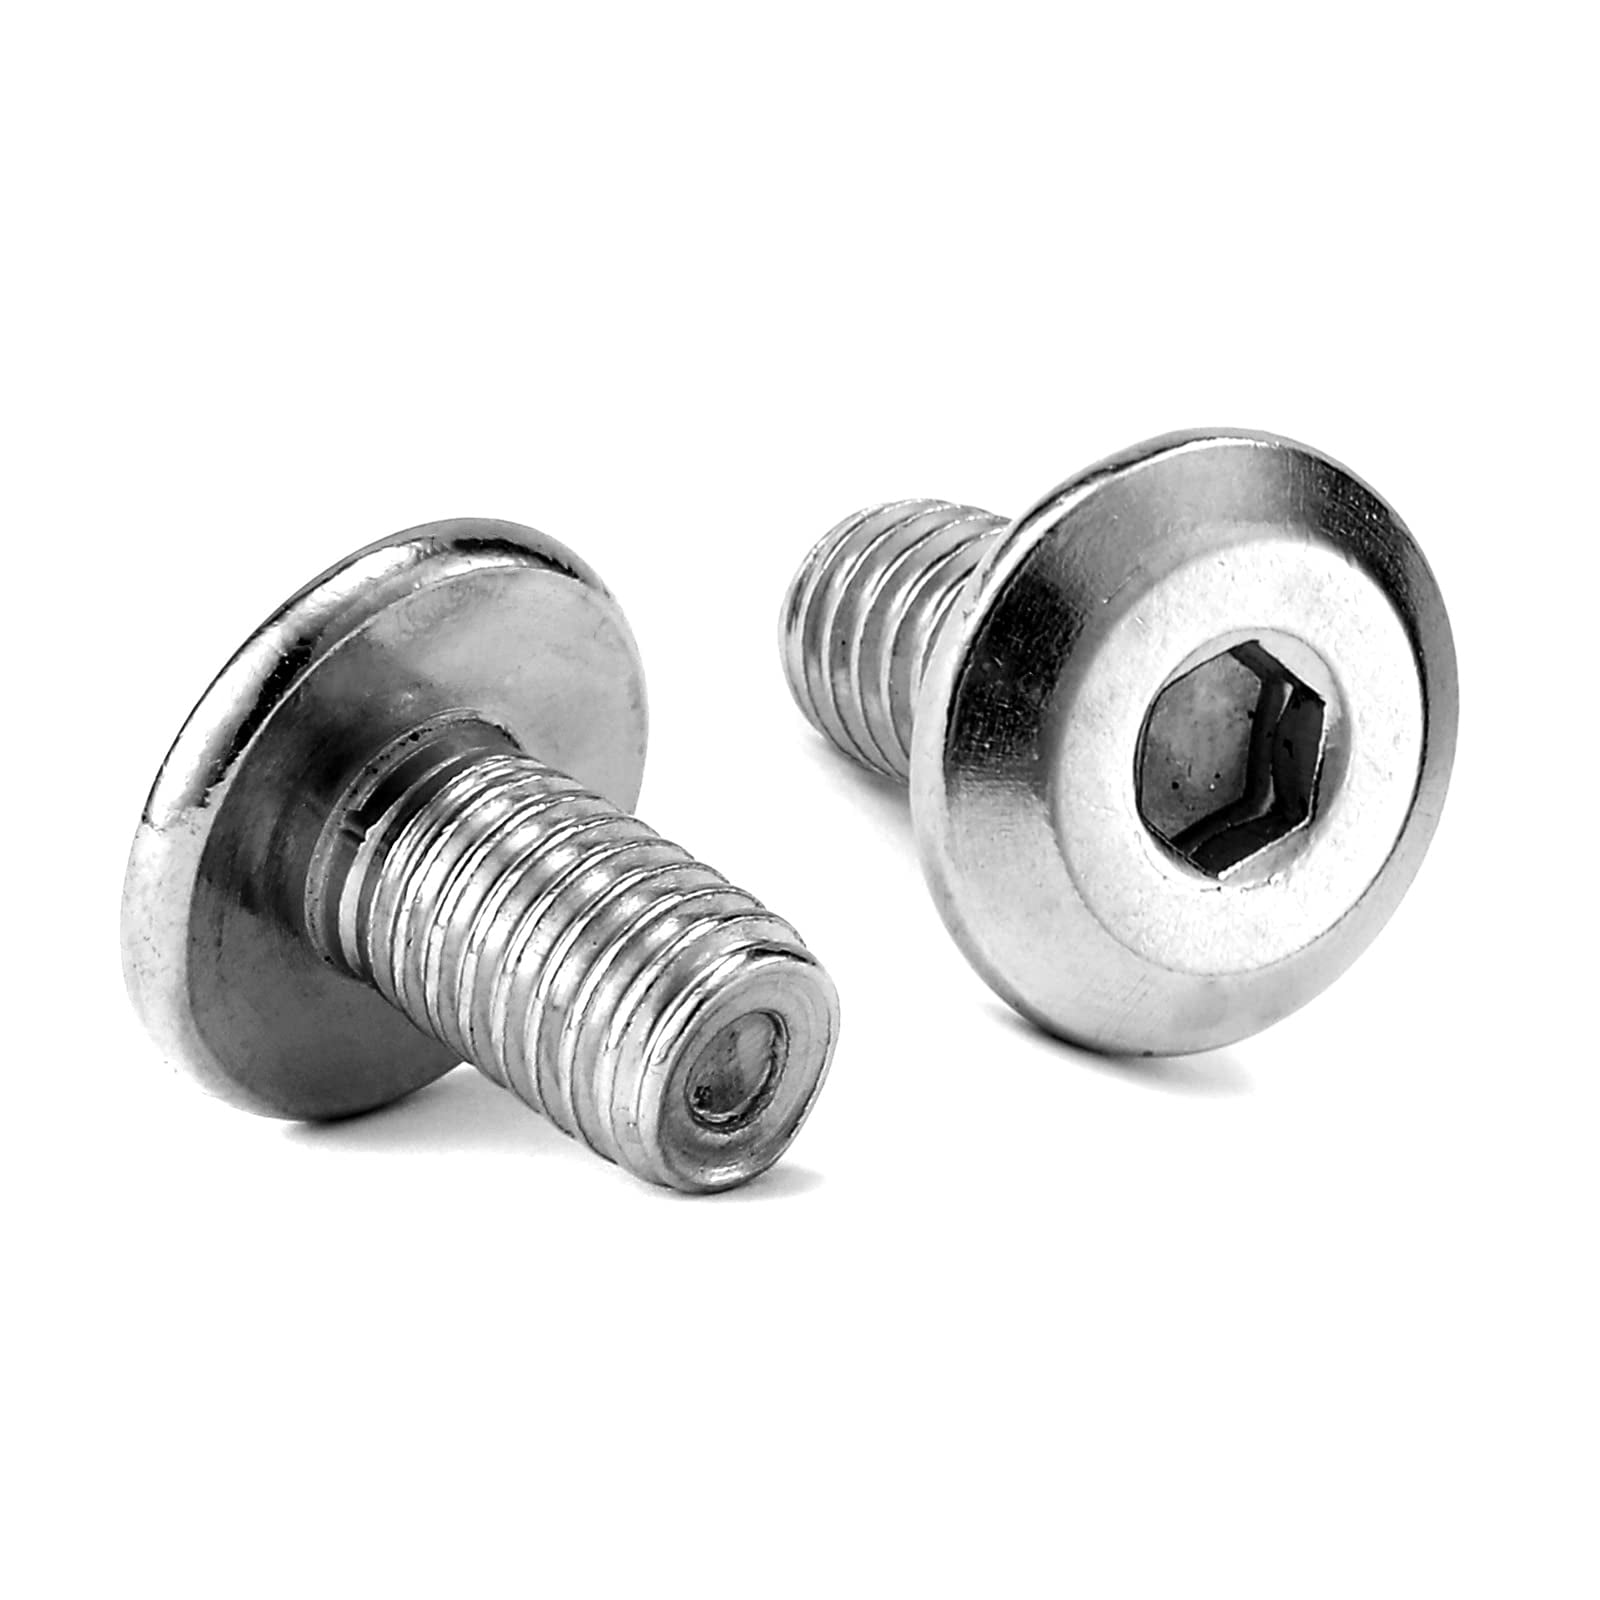 M6 x 10mm 20Pcs Flat Head Hex Socket Cap Screws Bolts, 304 Stainless Steel  18-8, Full Thread by (with Hex Spanner)